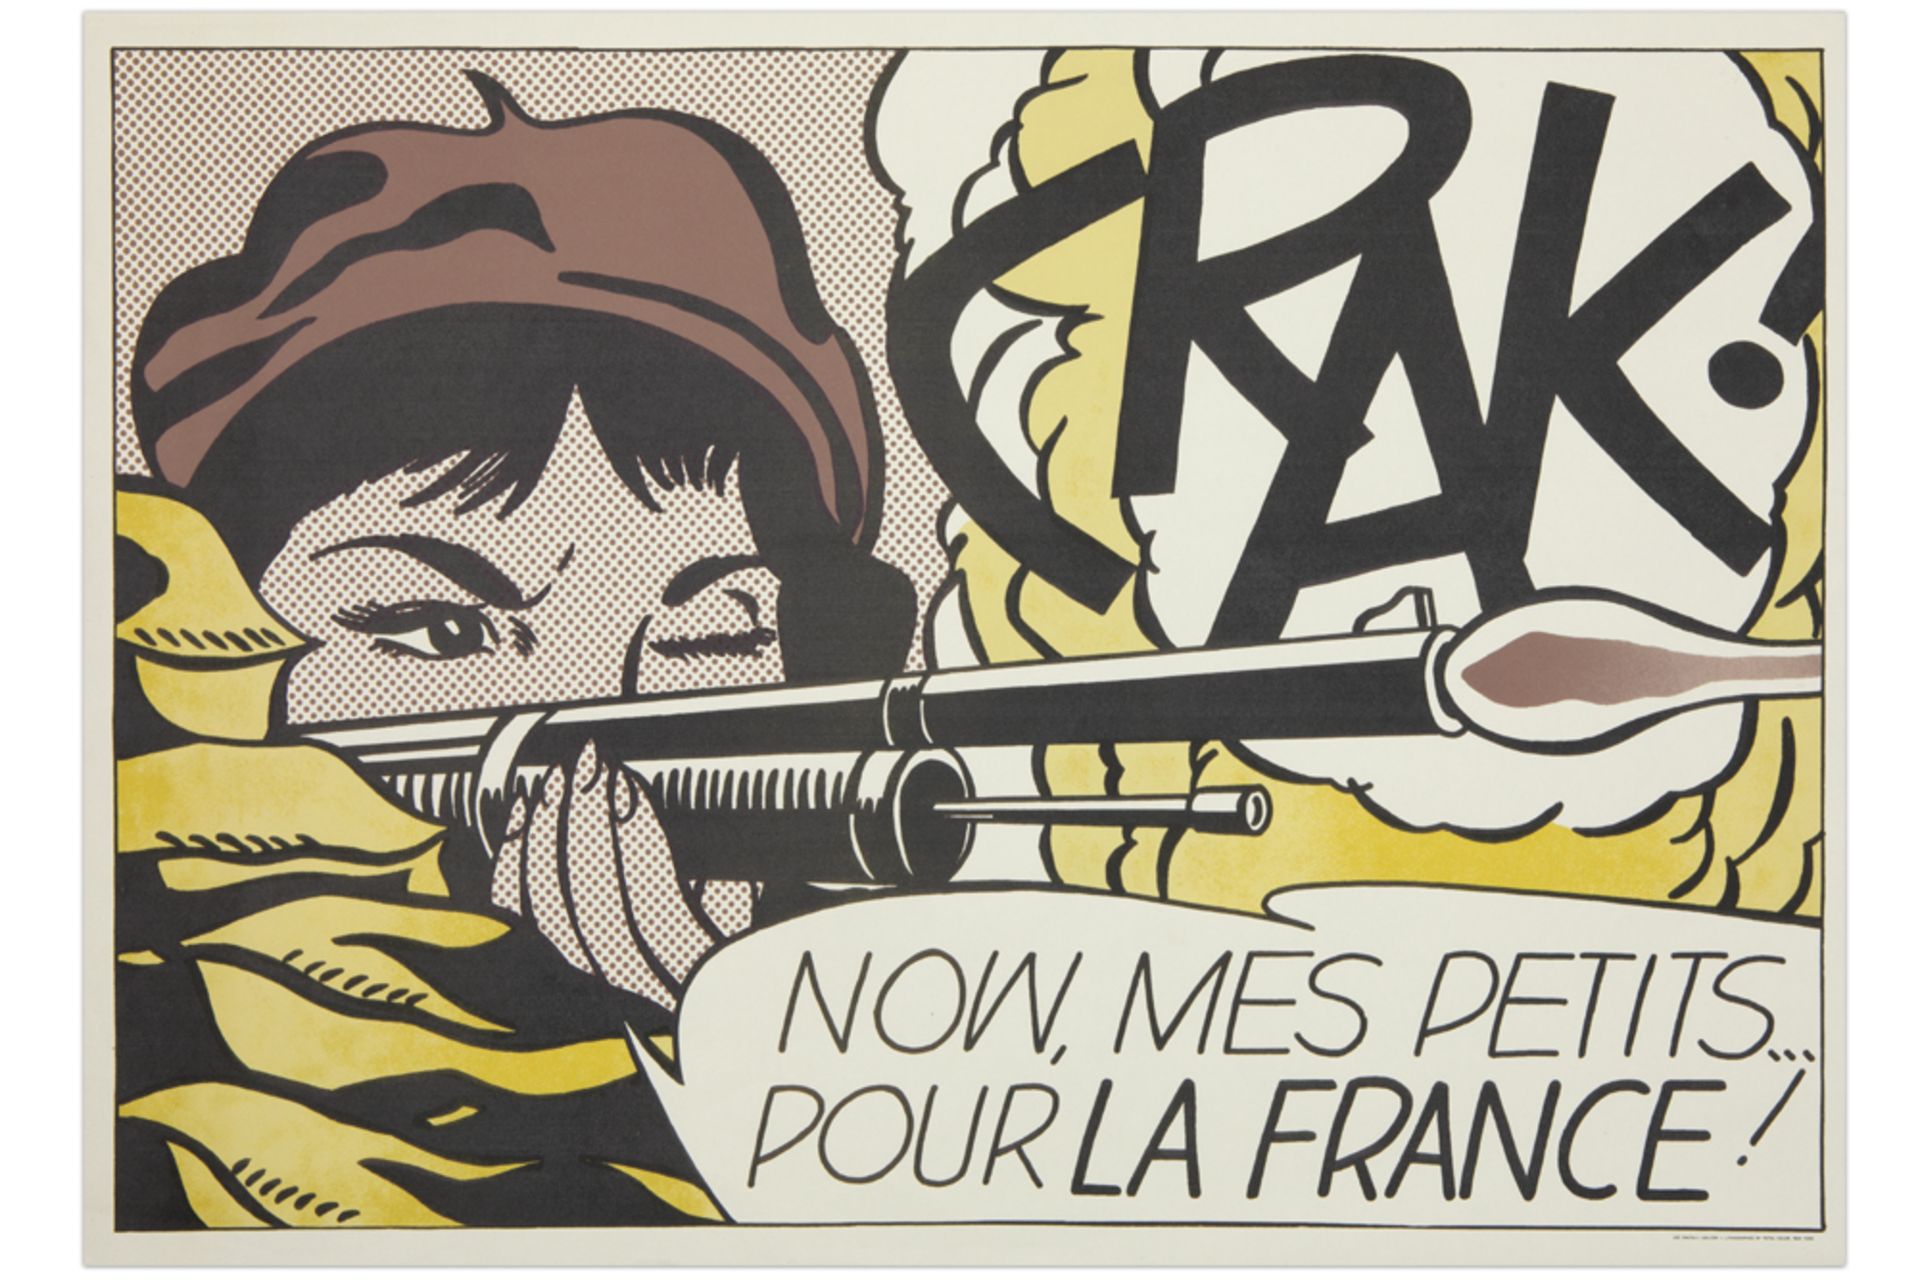 Roy Lichtenstein "Crak !" offset lithograph printed in colors printed by Total Color - New York